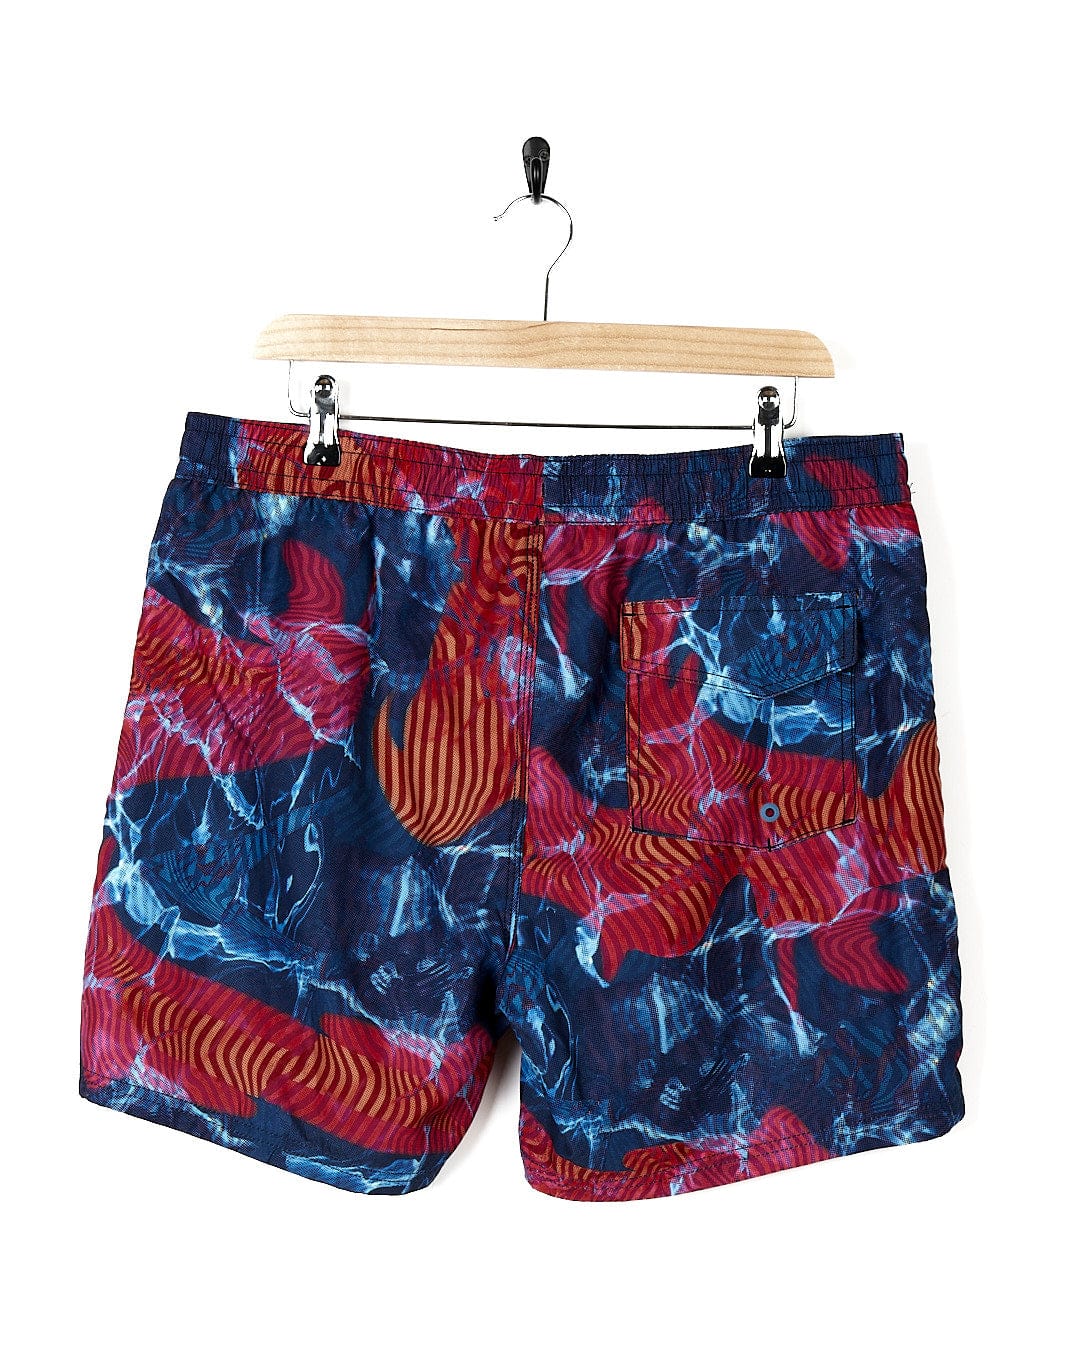 A men's swim short with a Poolside - Mens All Over Print Swimshort - Teal by Saltrock.